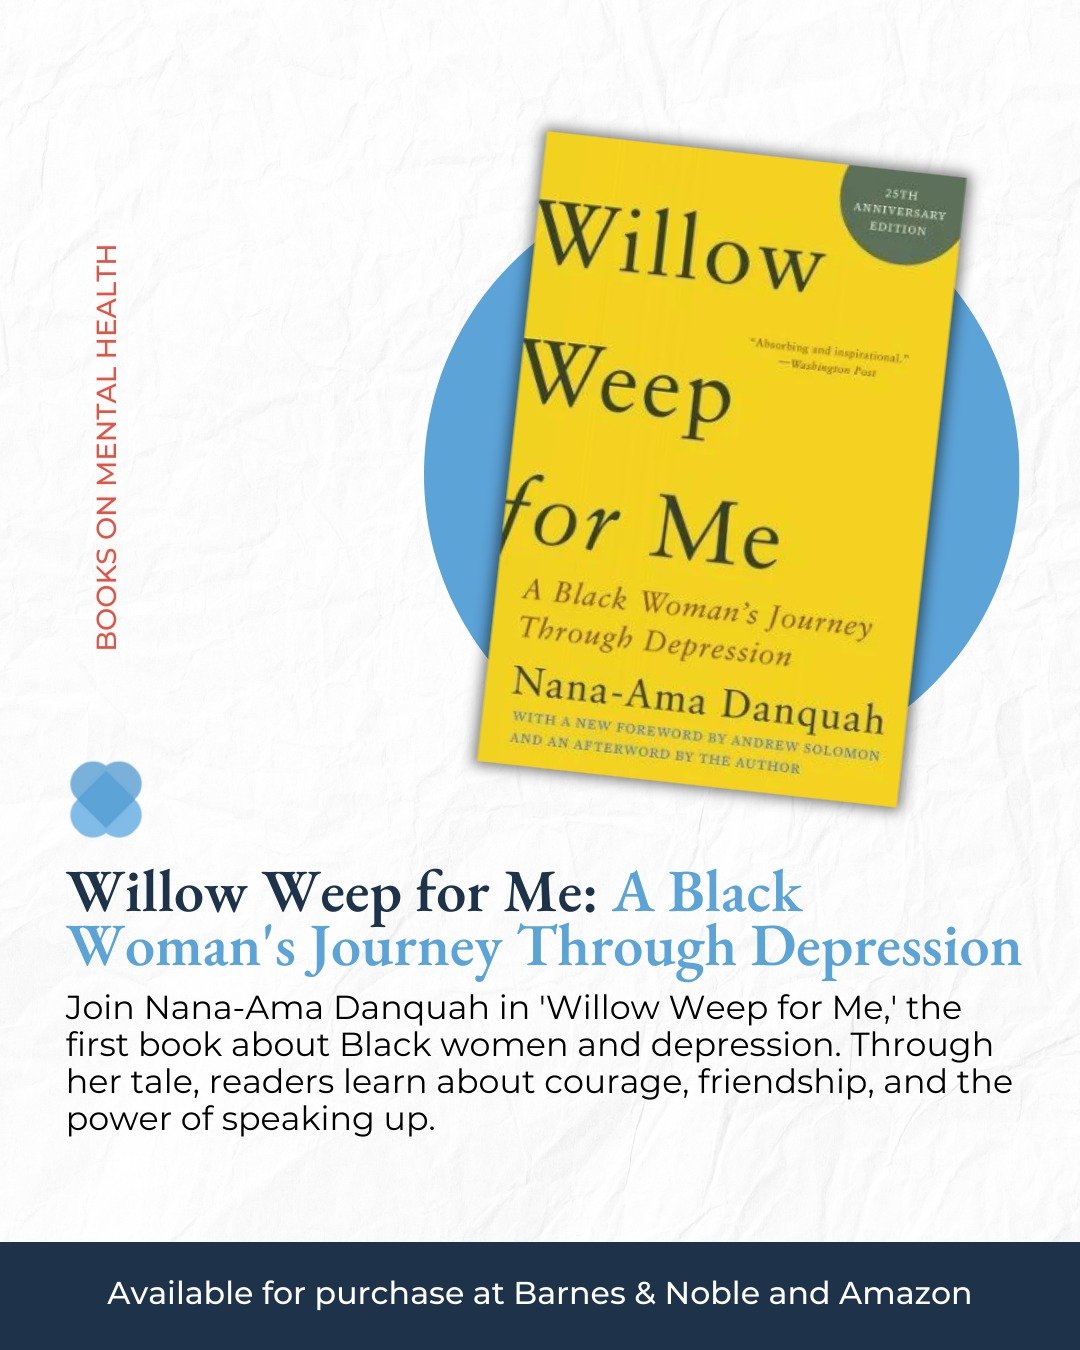 📚 Looking for a compelling read about mental health? Check out 'Willow Weep for Me by Nana-Ama Danquah! It's the first book to focus on Black women and depression, sharing an absorbing and inspirational journey. 

Follow Nana-Ama Danquah's powerful 